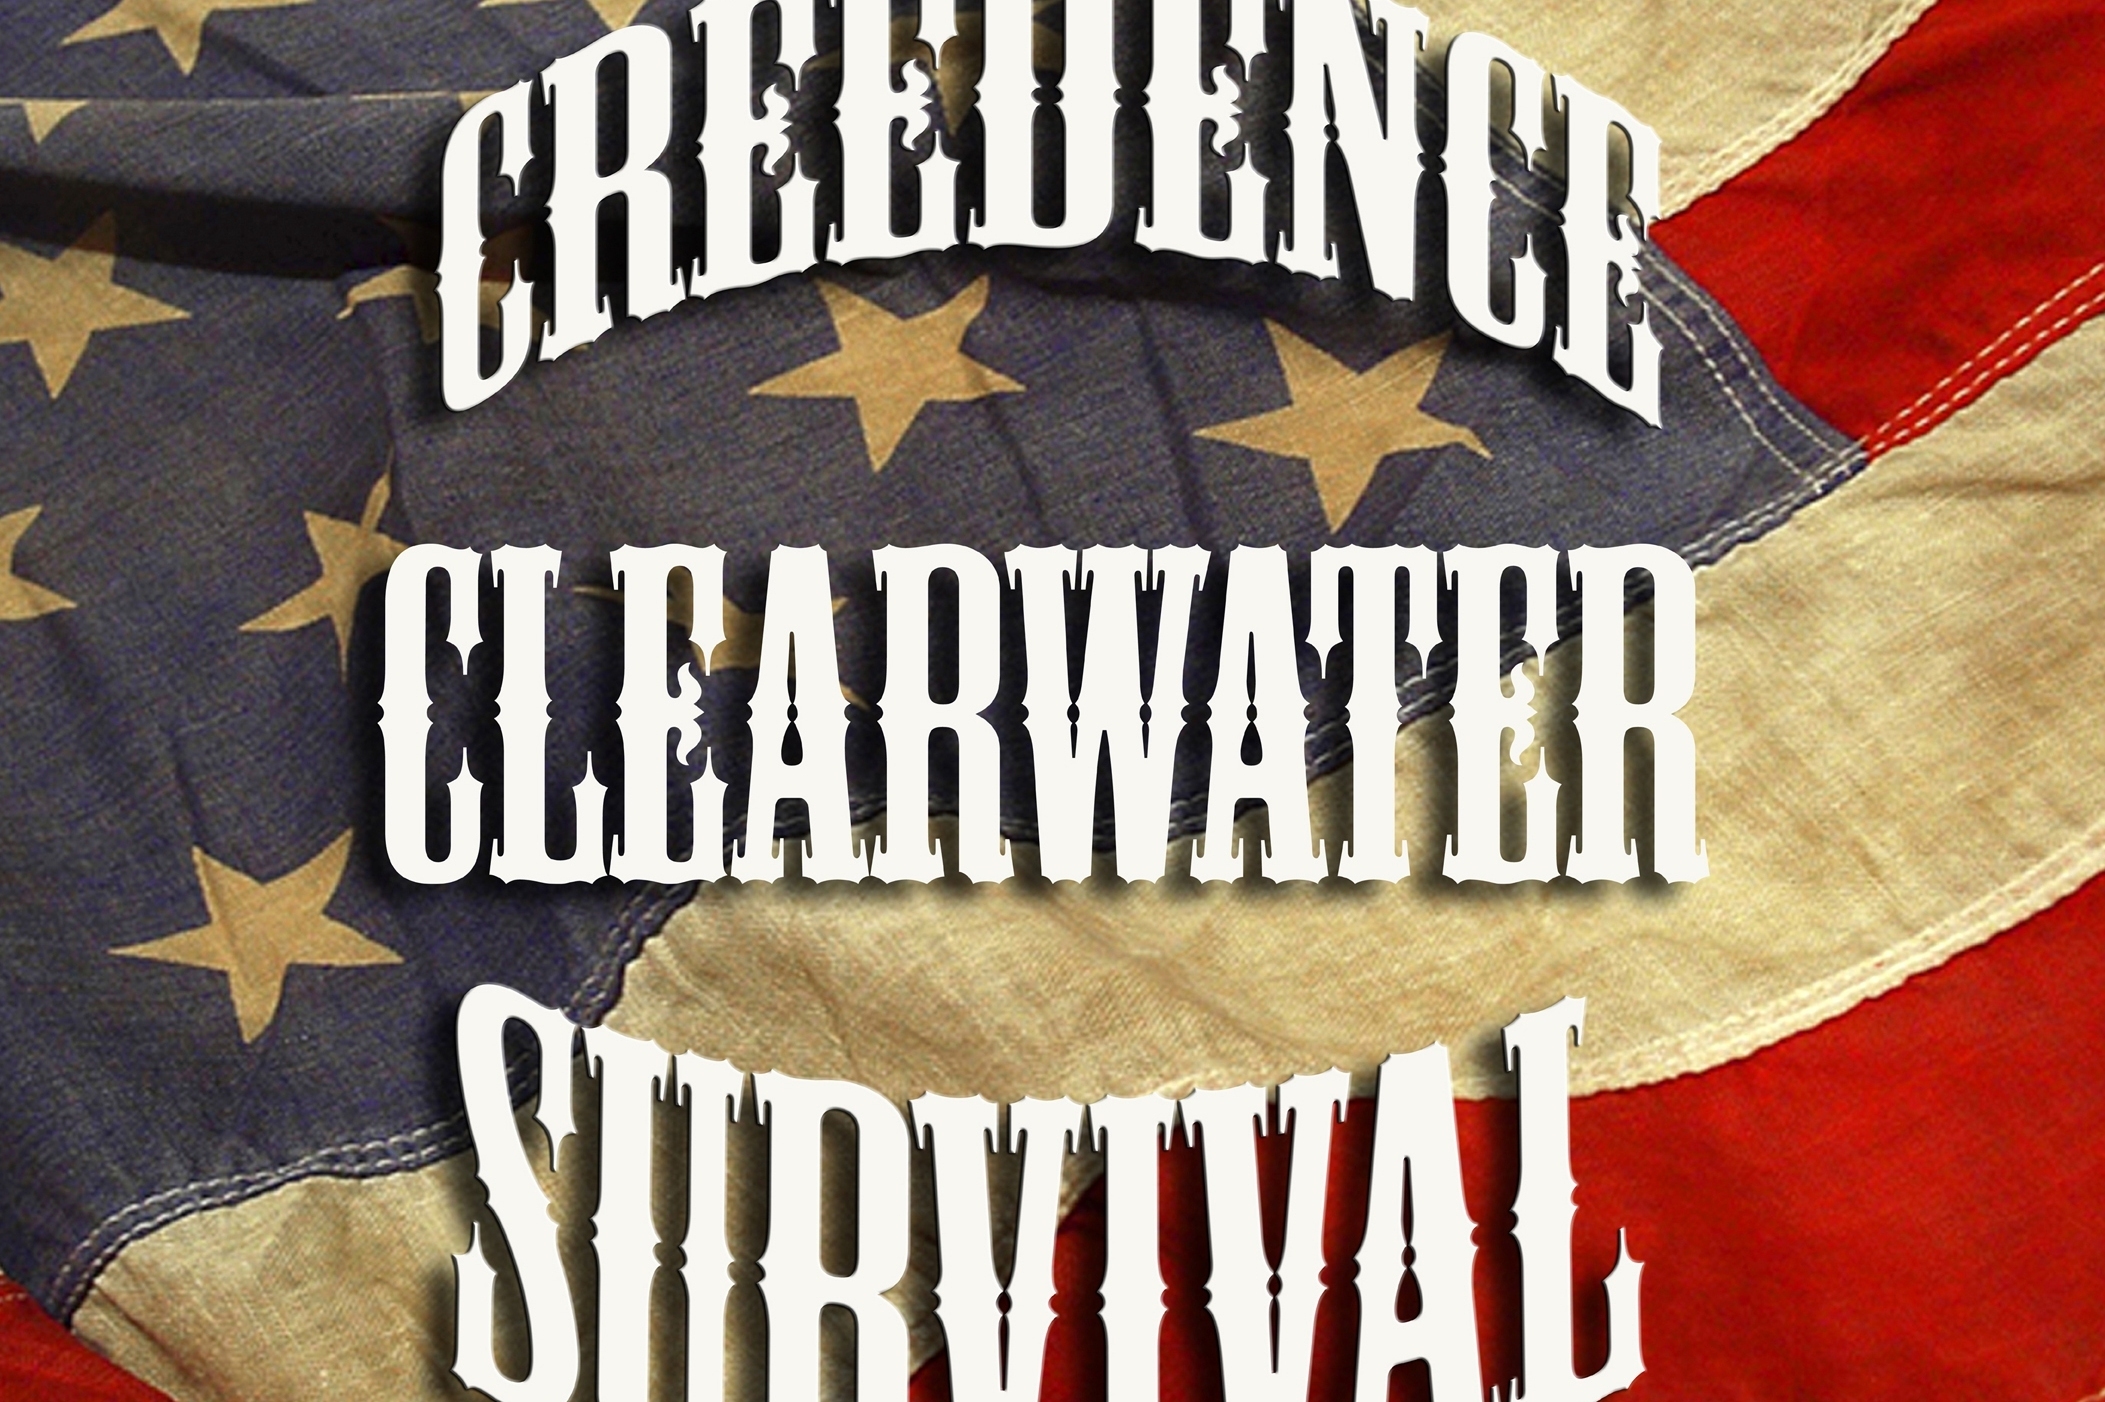 Creedence Clearwater Survival - Melbourne's #1 John Fogerty/CCR Dinner & Show - GOOD FRIDAY EVE